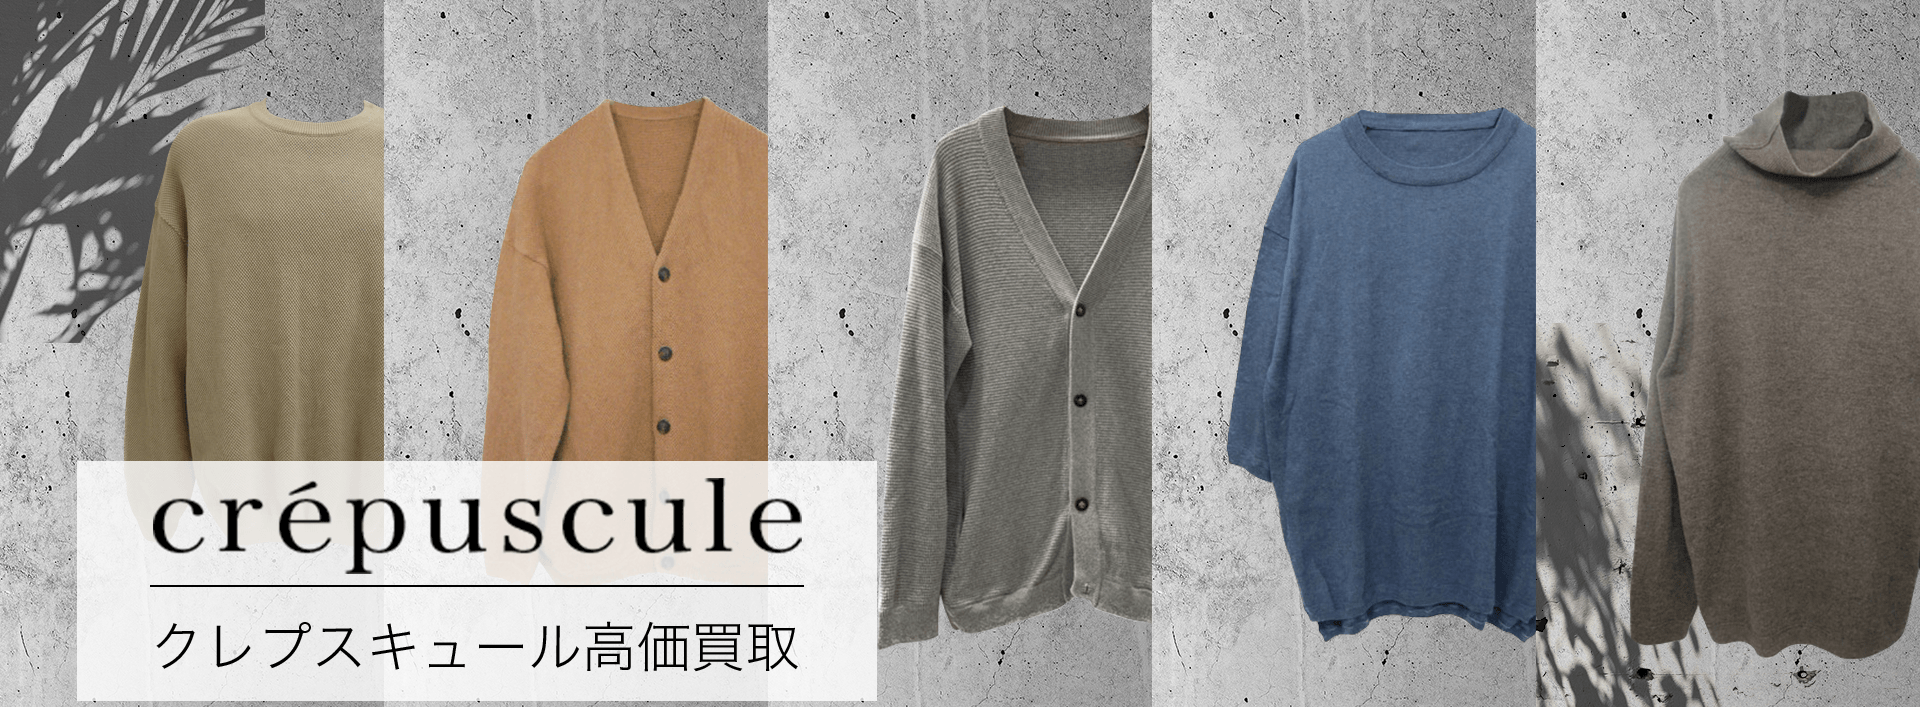 crépuscule（クレプスキュール）高価買取